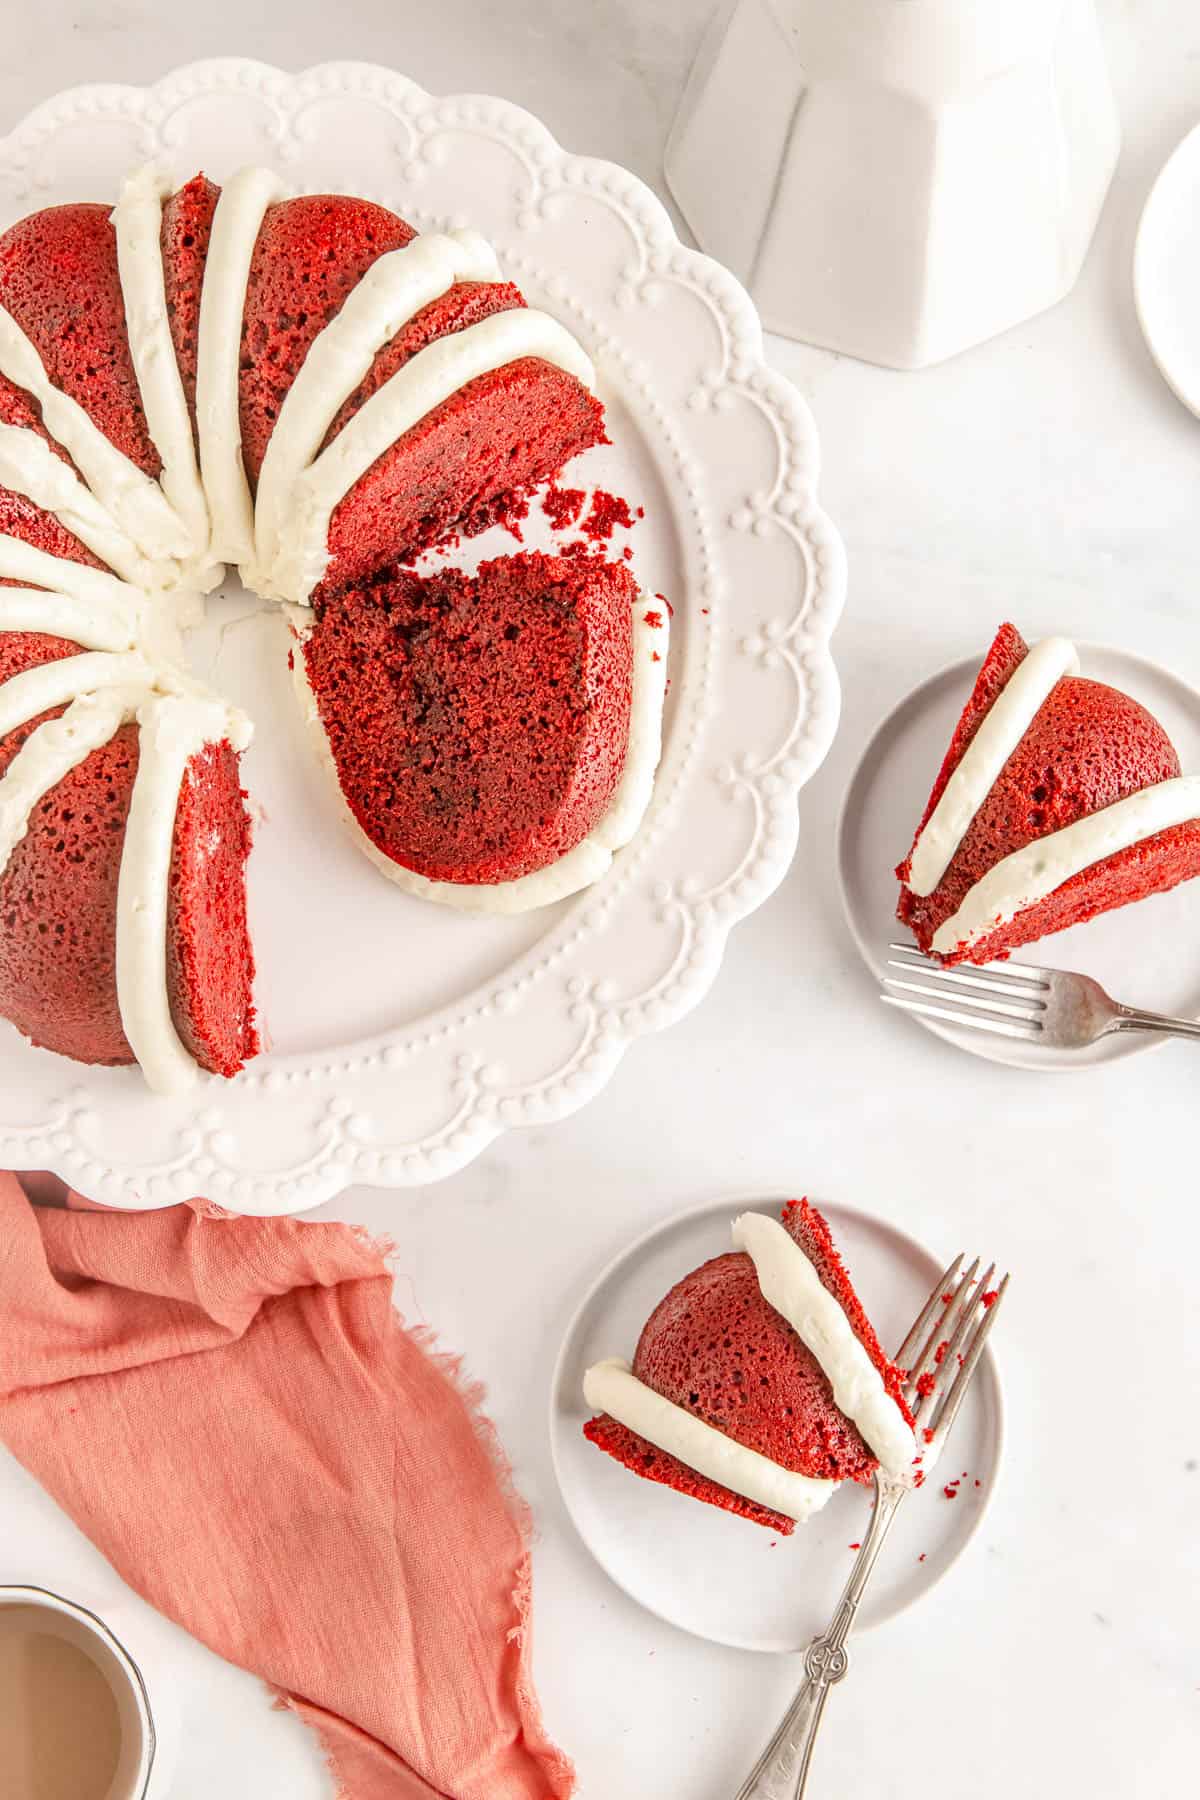 Overhead of a red velvet pound cake on a cake stand with two servings of red velvet cake on white plates.